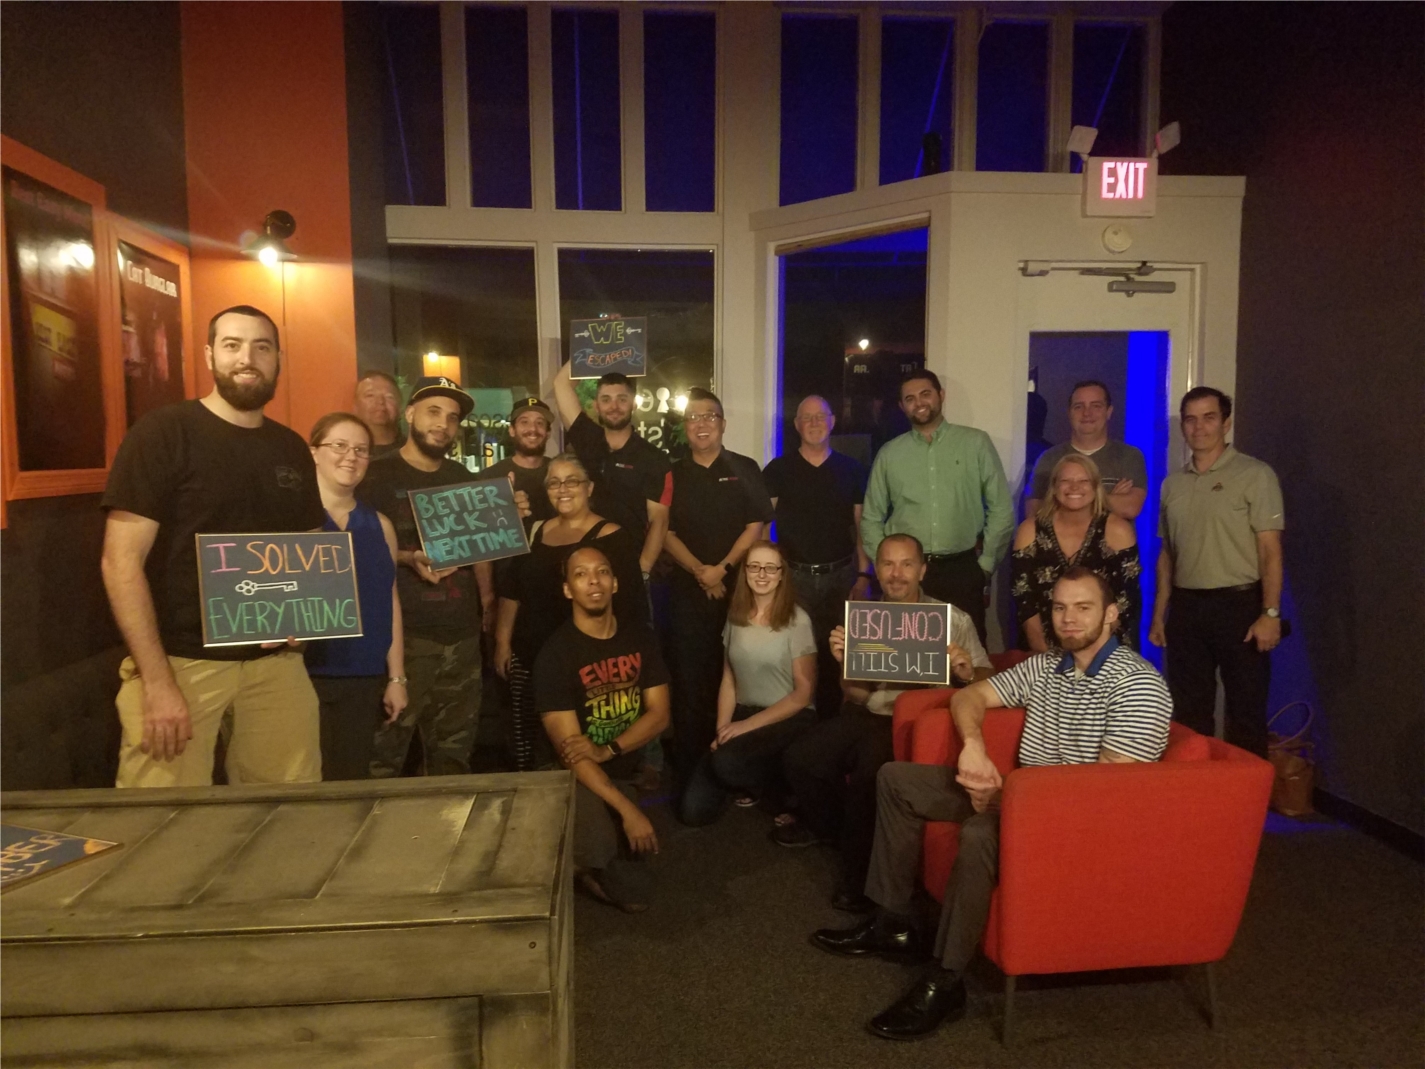 A recent company sponsored event that had teams escape from a room in a timed challenge. The challenge to this event was not only to escape the room, but to work with people they do not normally interact with on a daily basis.
We had one successful team escape their room, our Vice President's team. 